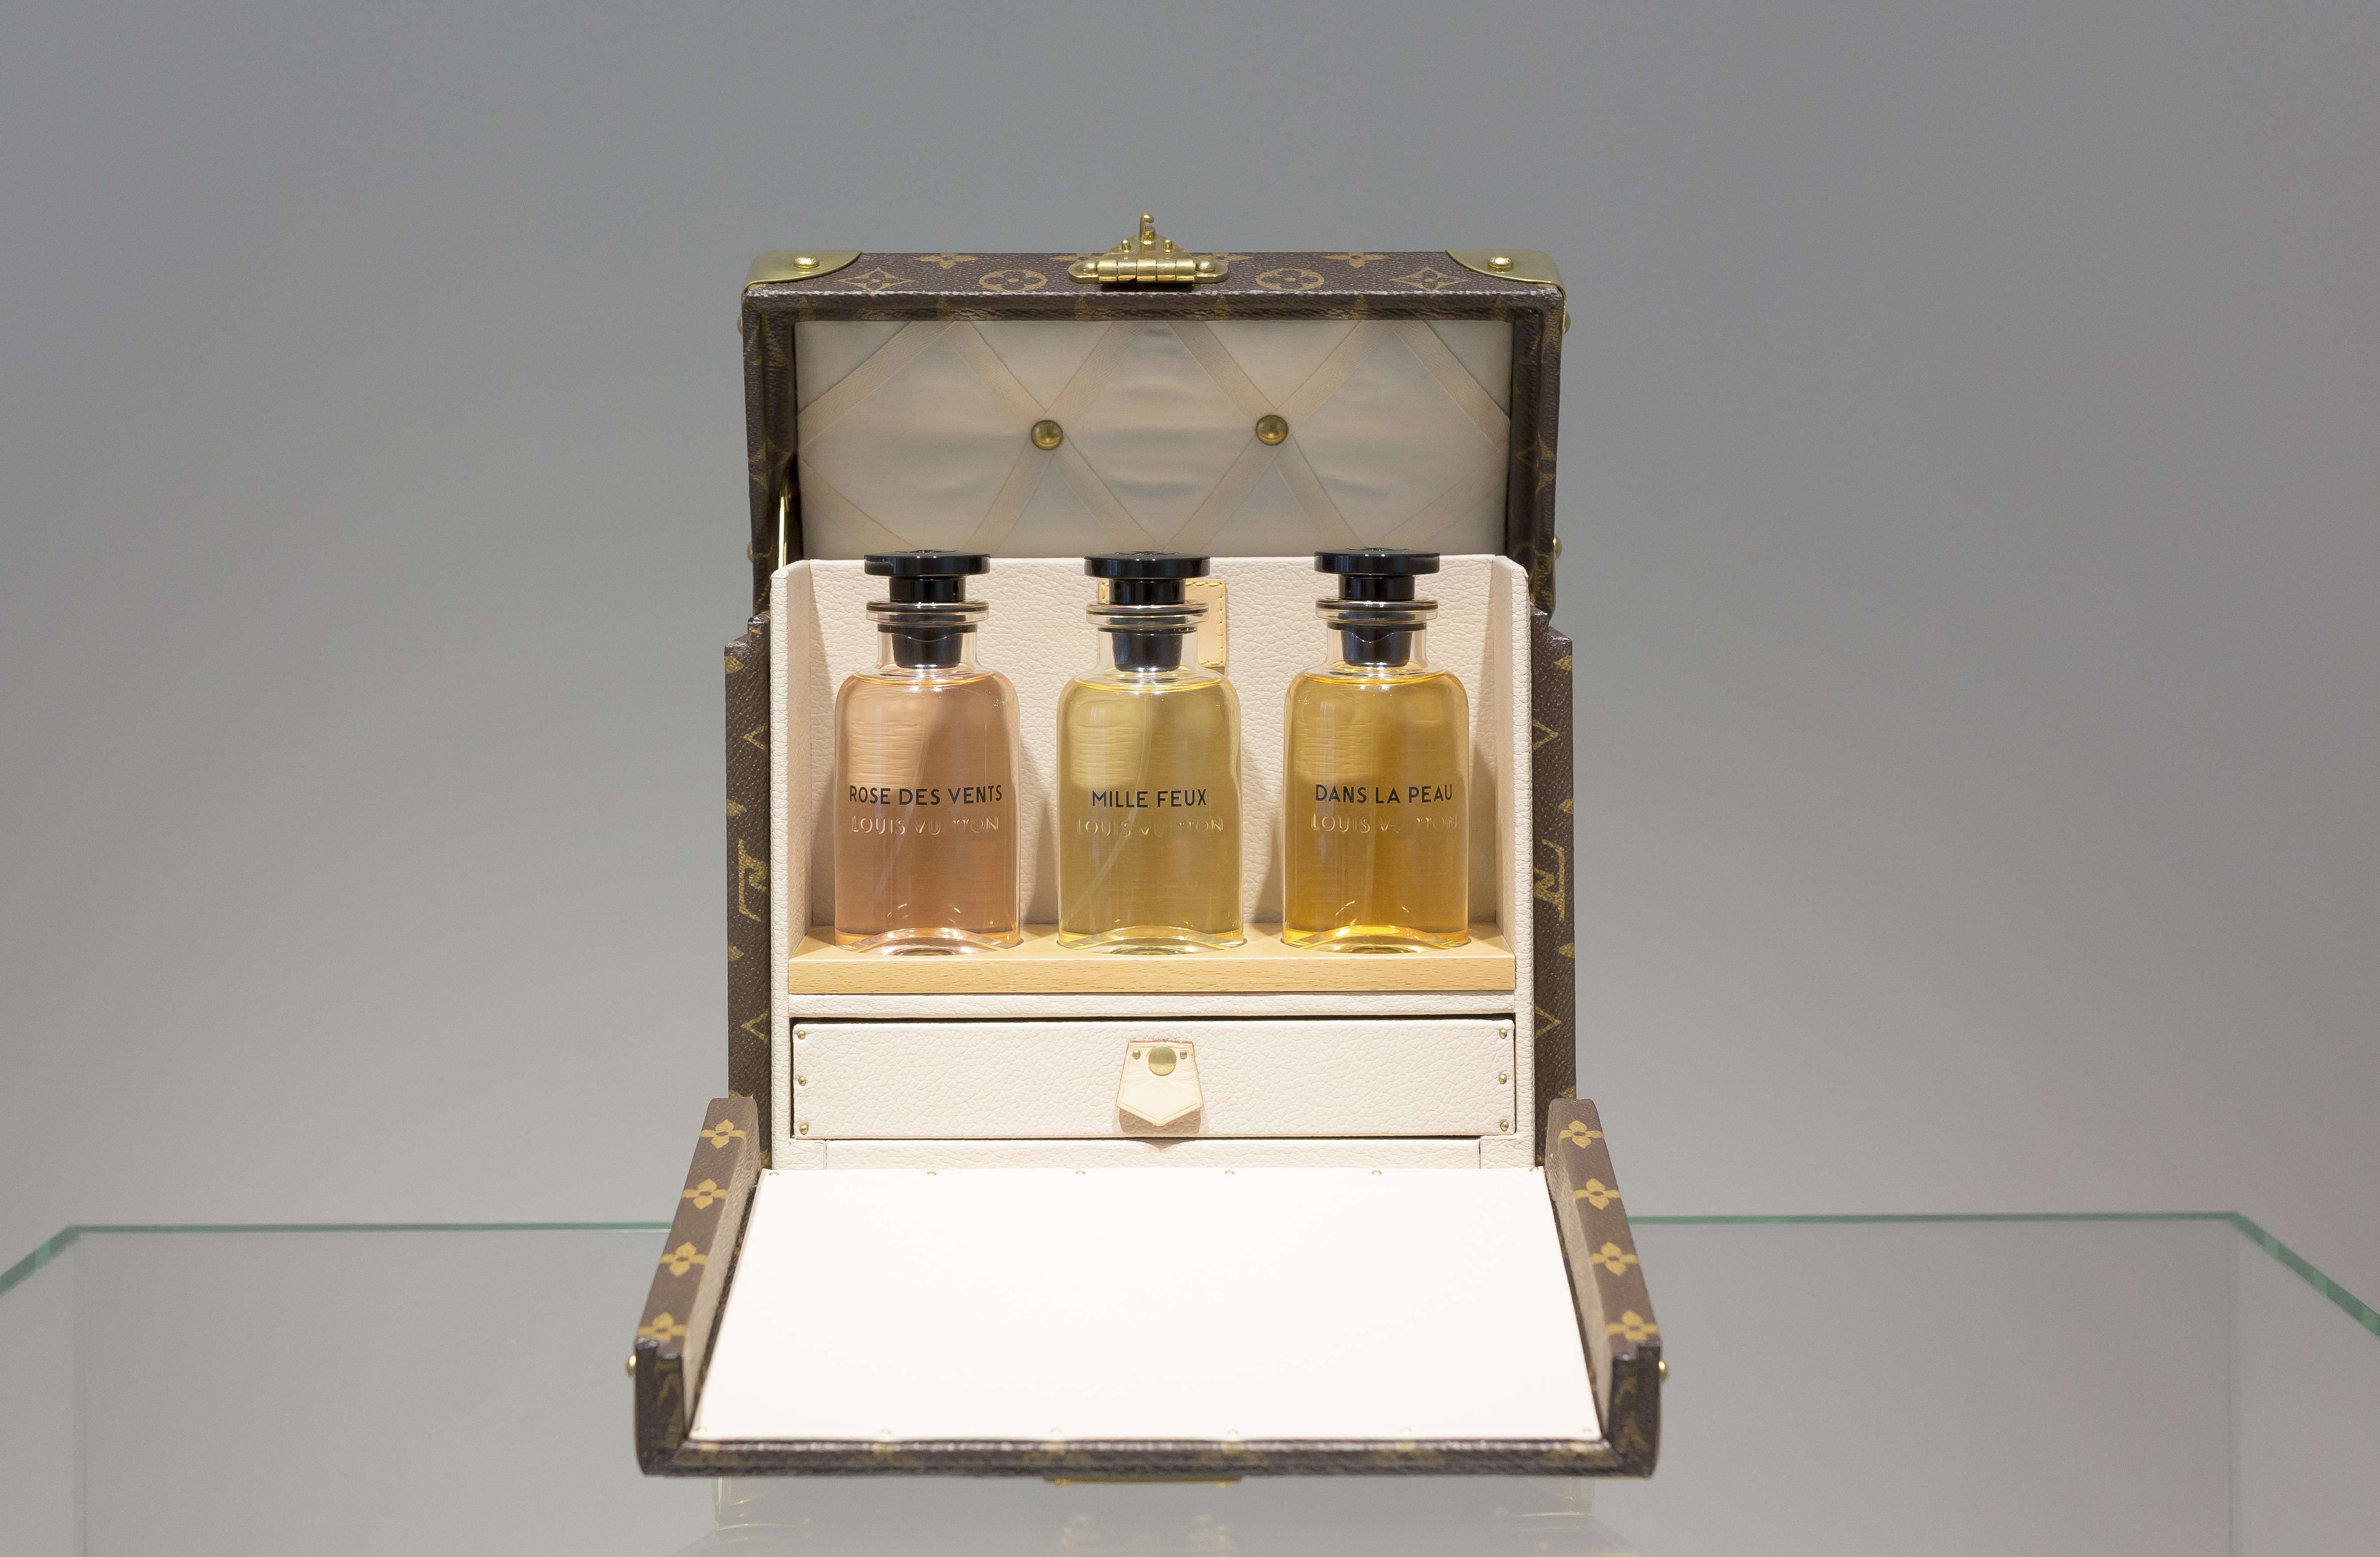 Louis Vuitton's first fragrances in 70 years: Les Parfums Louis